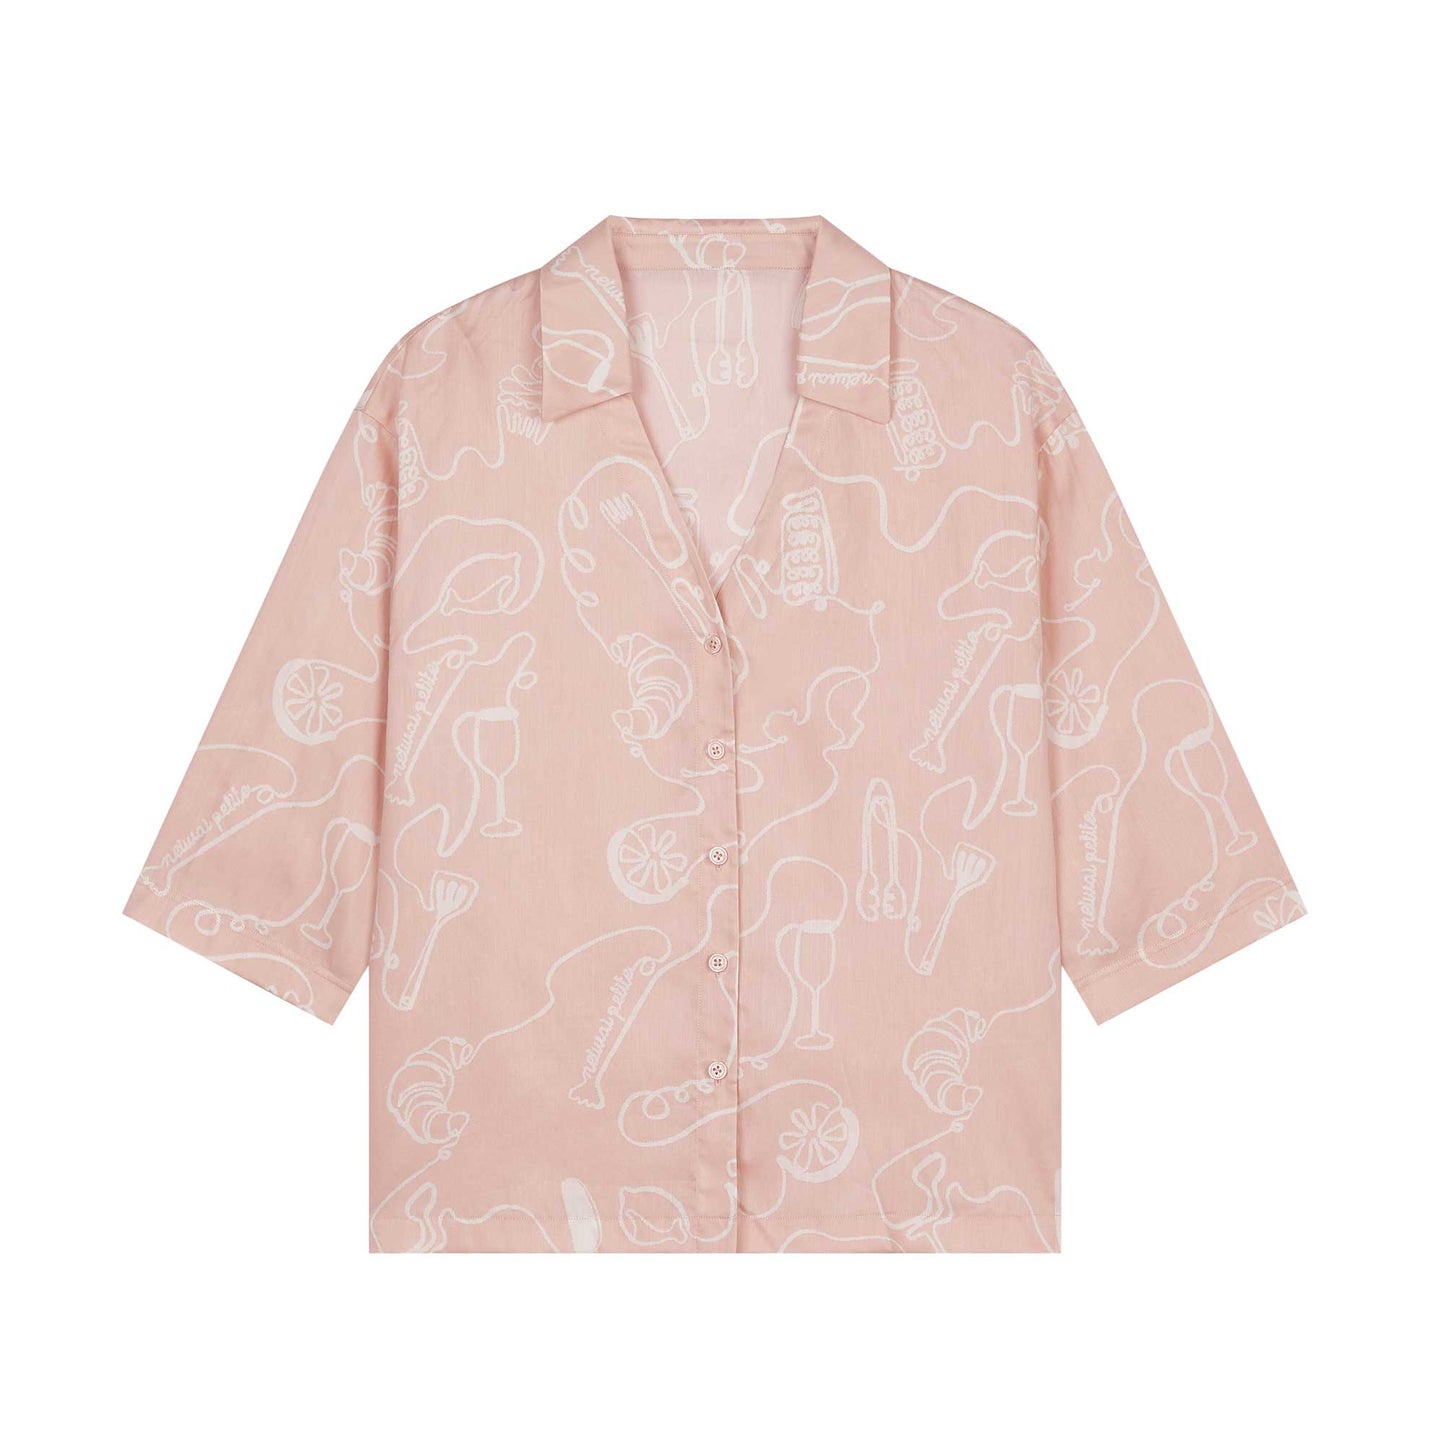 flay lay of pink pajama shirt with white sketches